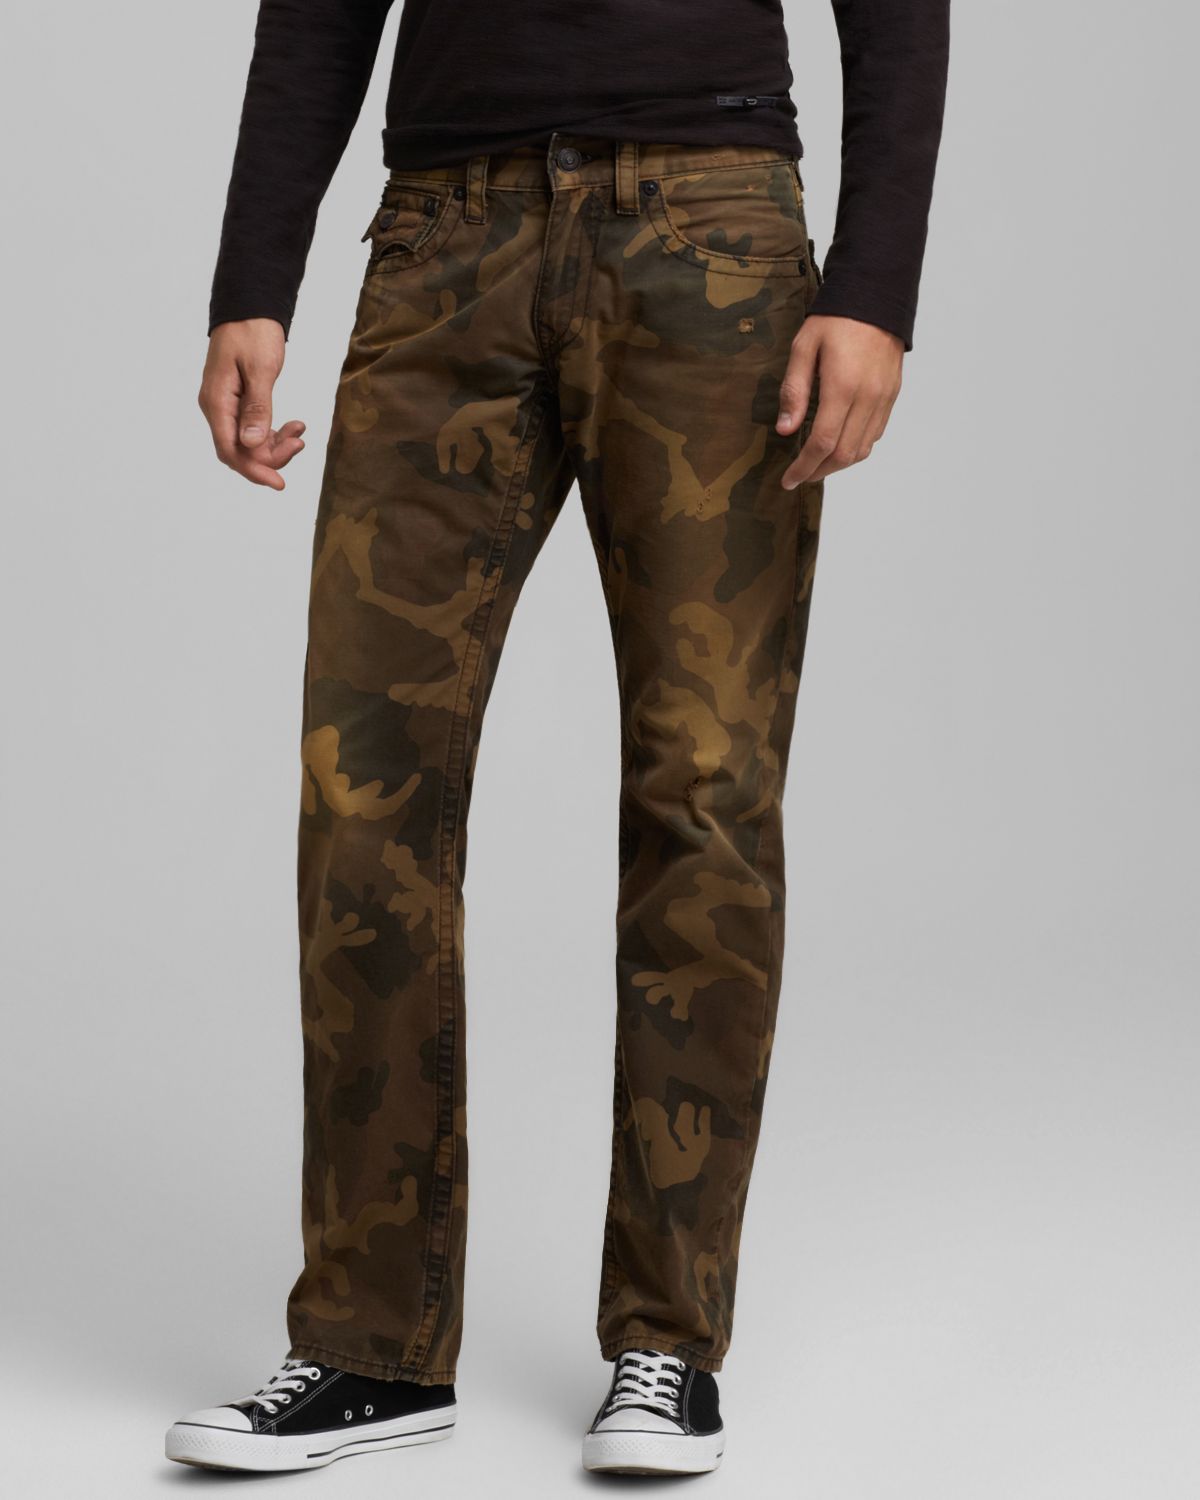 True Religion Jeans Ricky Straight Fit in Camo in Brown for Men | Lyst